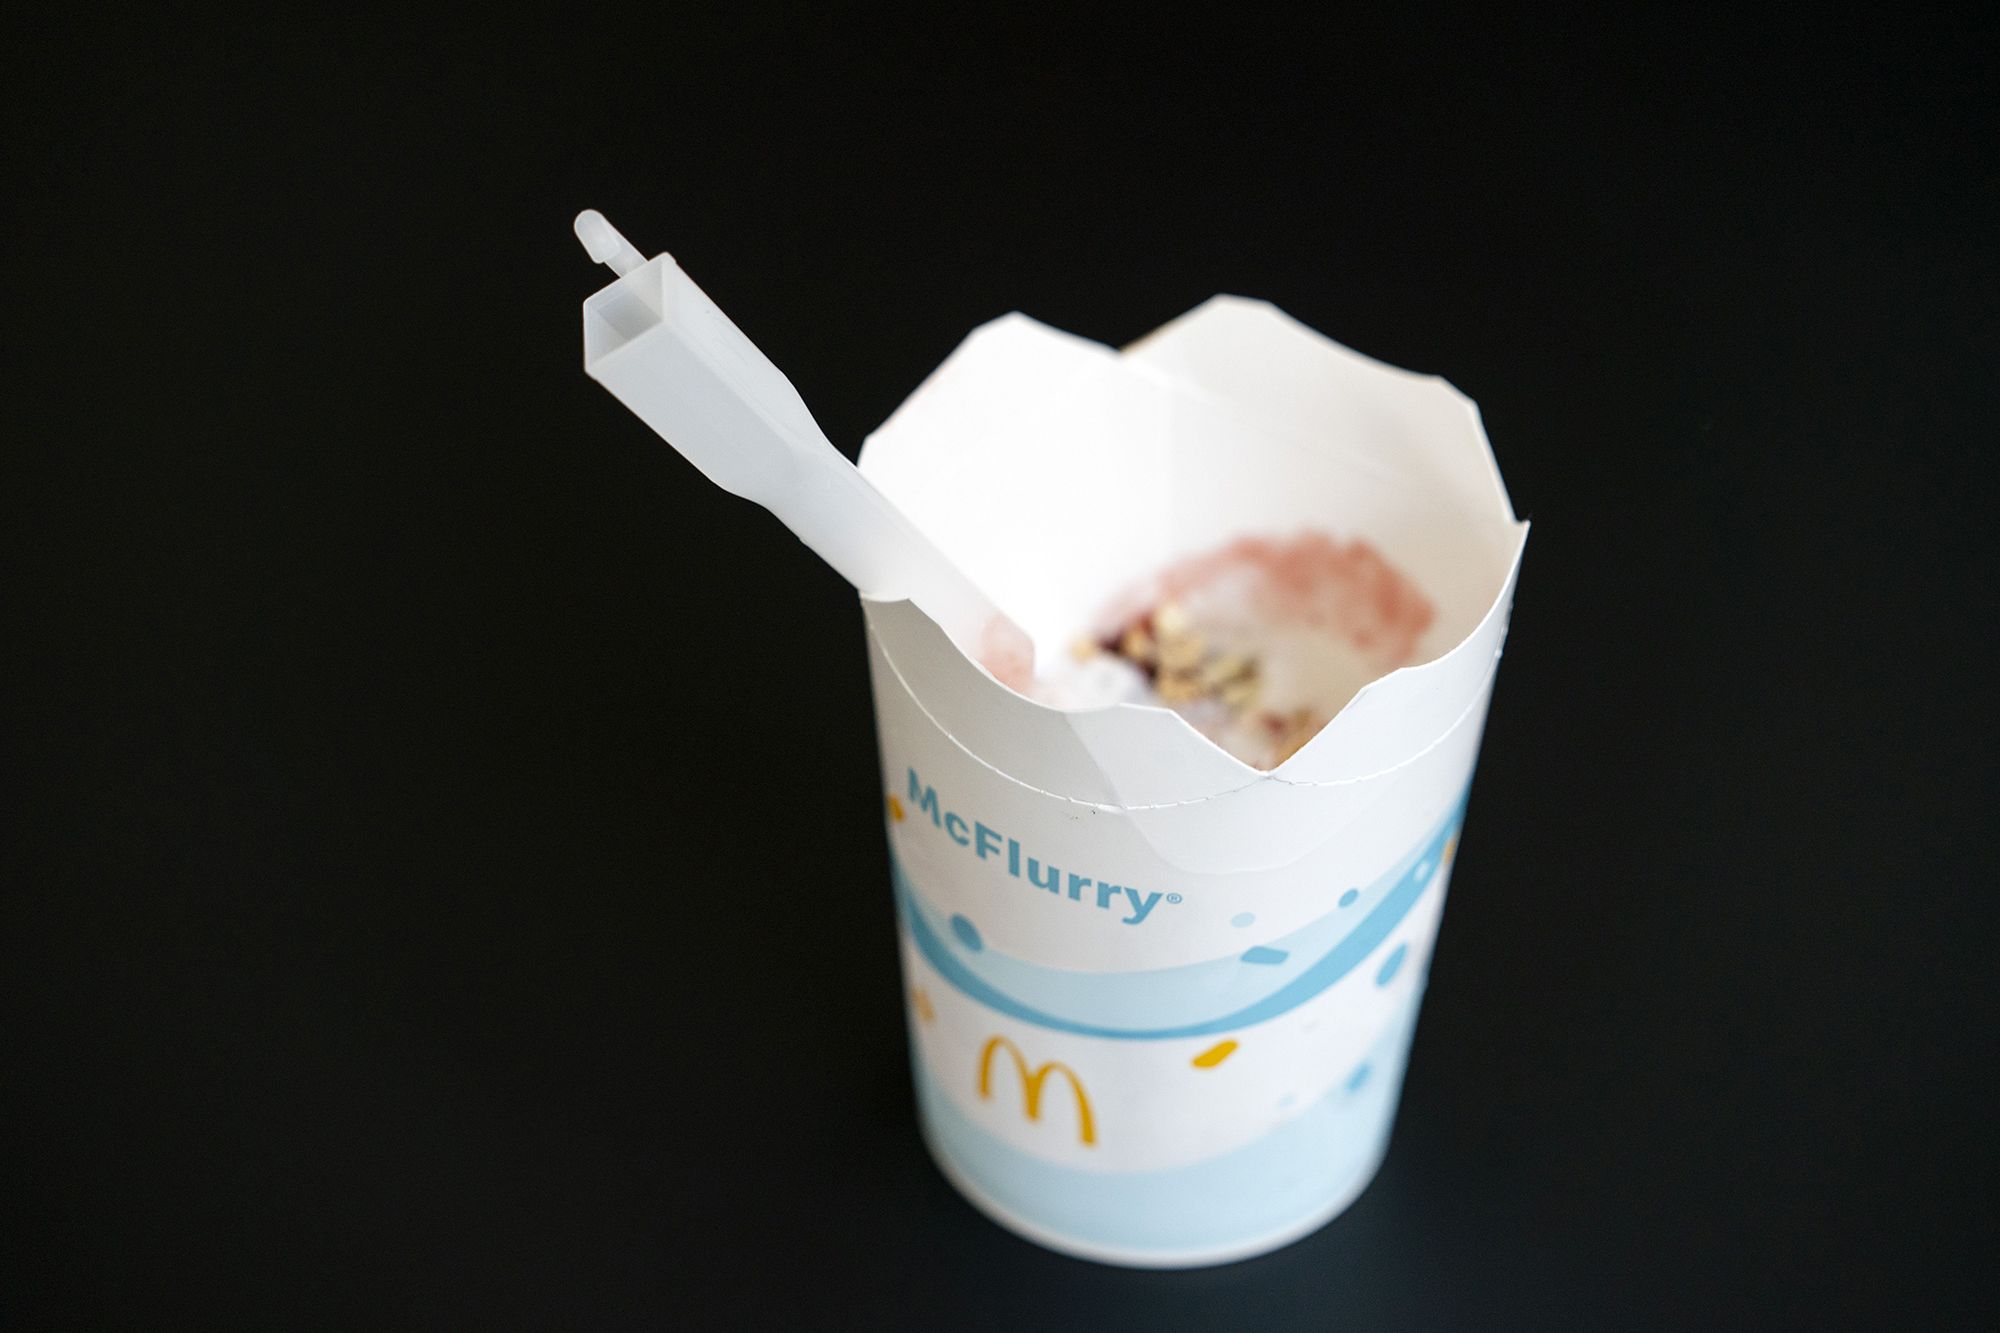 McDonald's is phasing out McFlurry spoons.
(Credit: Hollandse-Hoogte/ZUMA Press)...